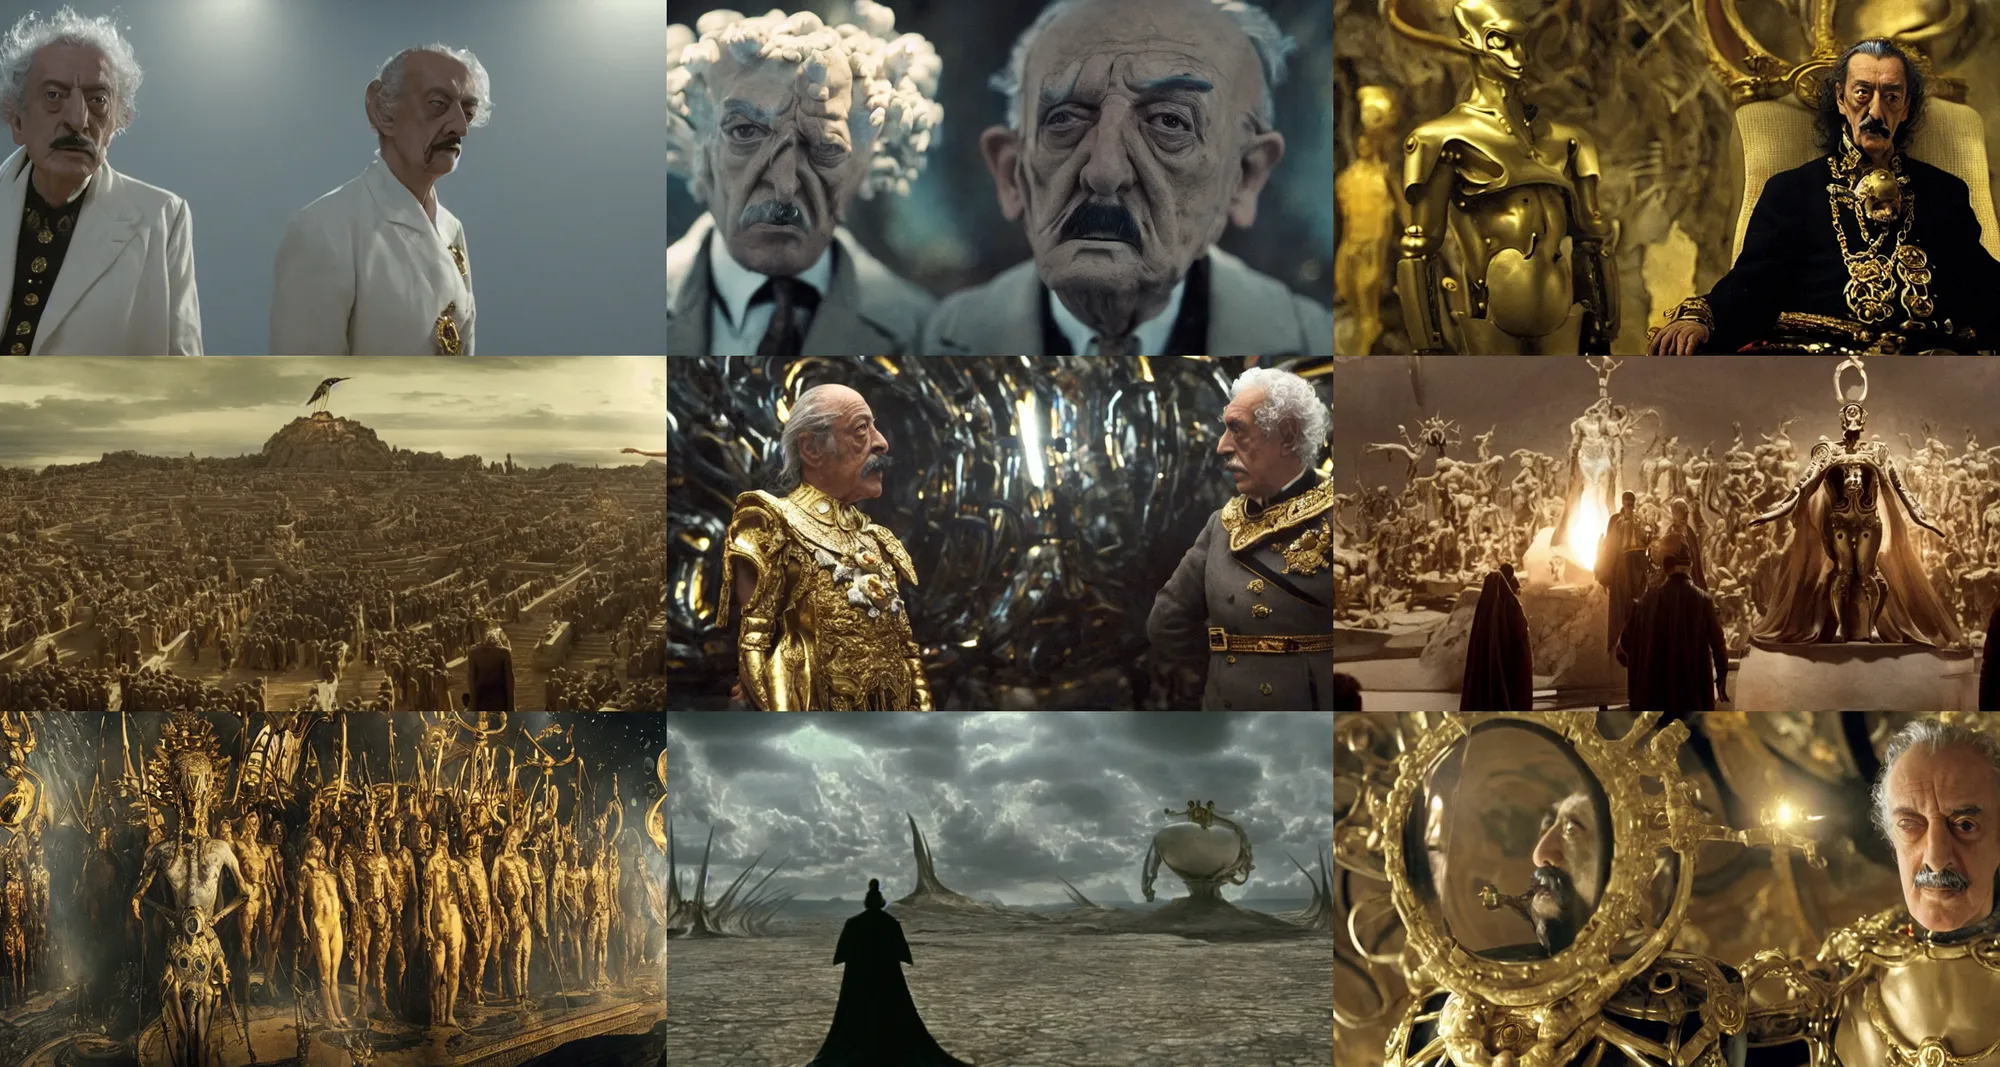 Prompt: salvador dali in the role of emperor | still frame from the prometheus movie by ridley scott and alejandro jodorowsky with cinematogrophy of christopher doyle, anamorphic bokeh and lens flares, 8 k, higly detailed masterpiece